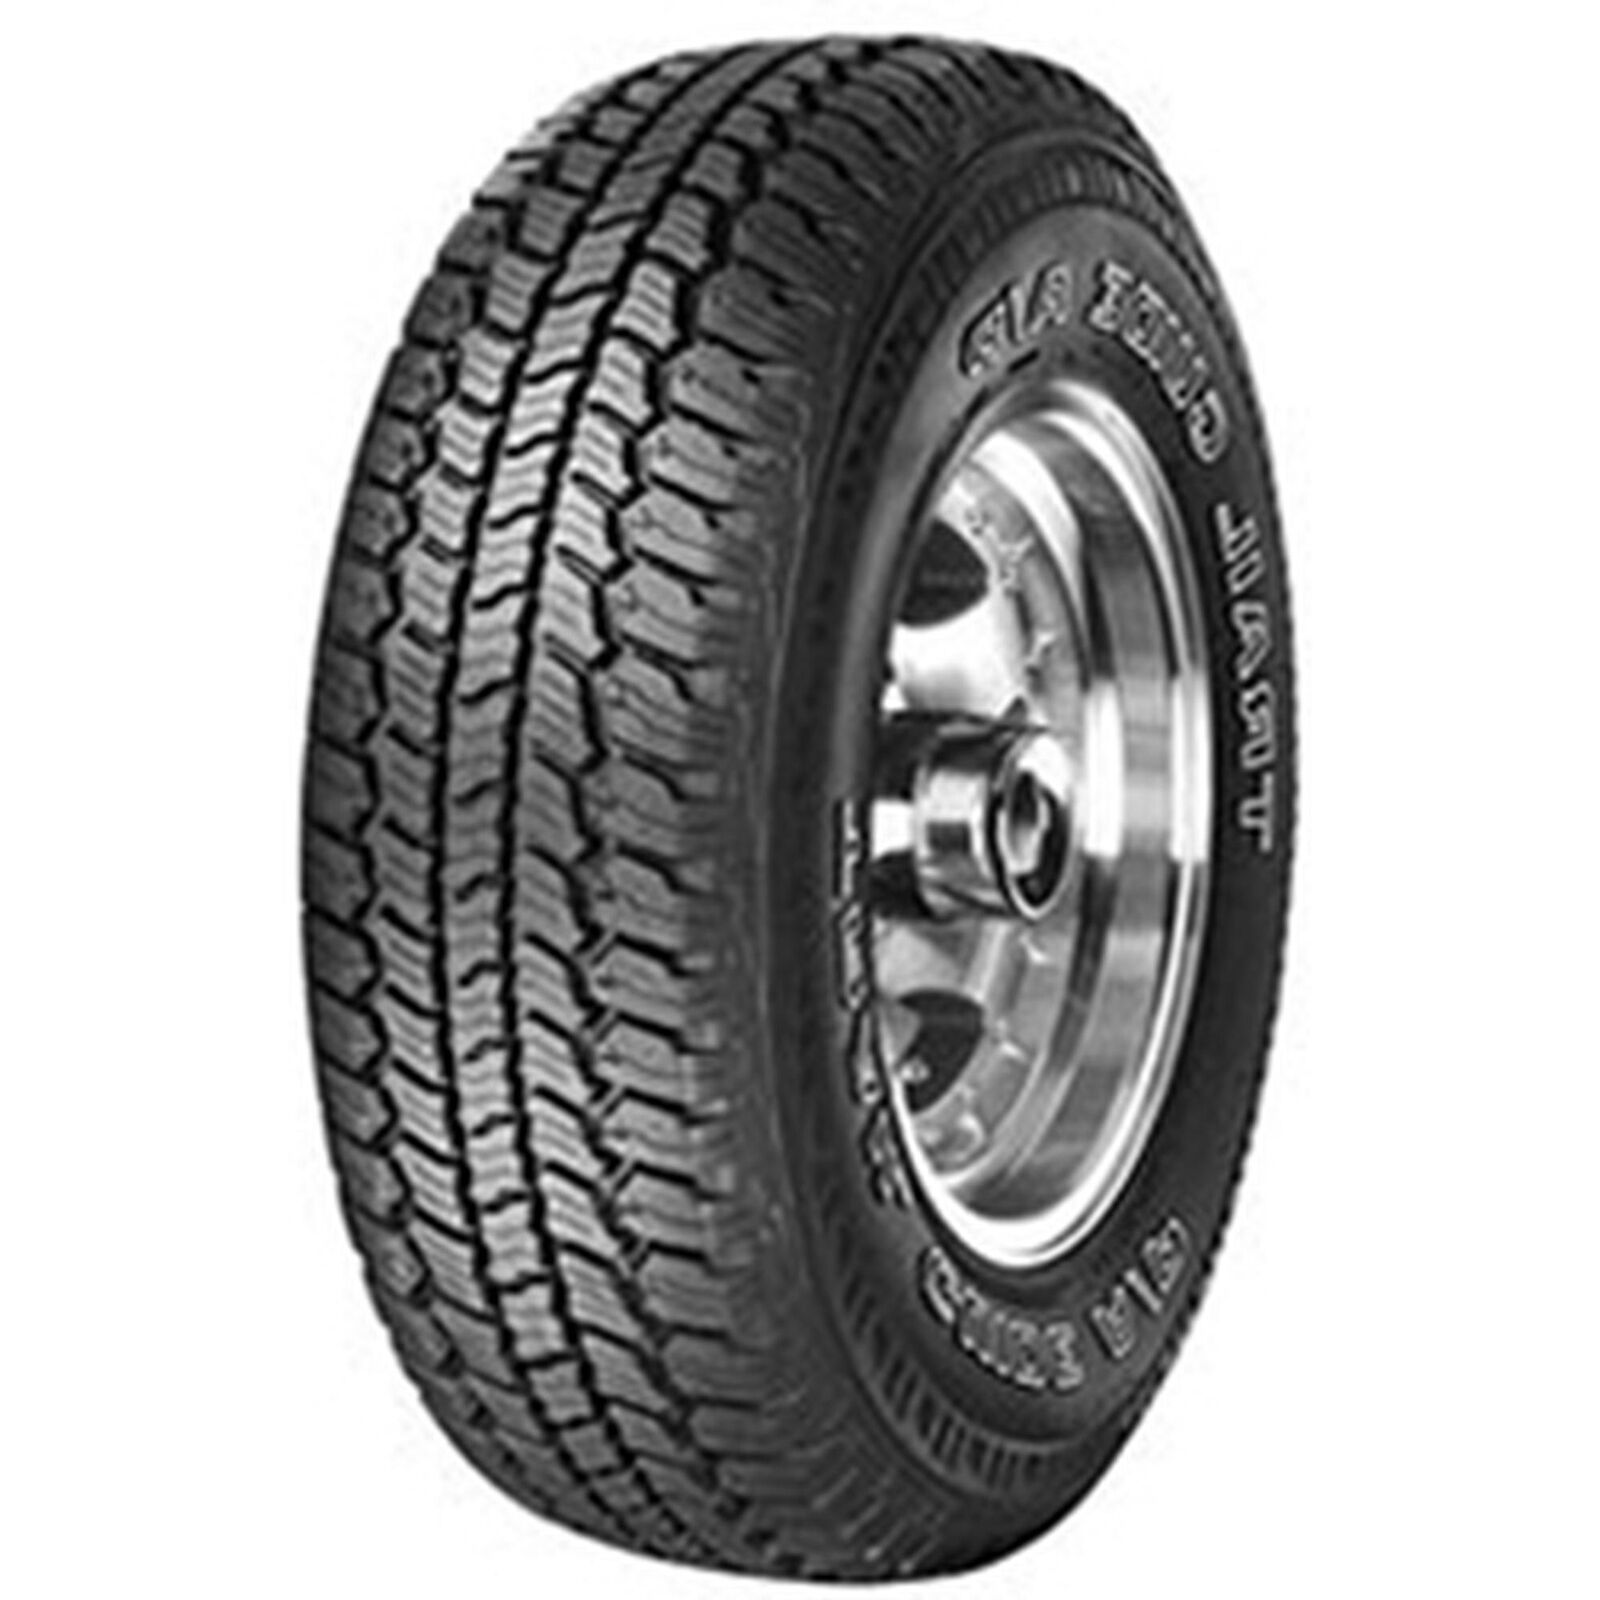 2 New Sigma Trail Guide A/t  - Lt235x80r17 Tires 2358017 235 80 17